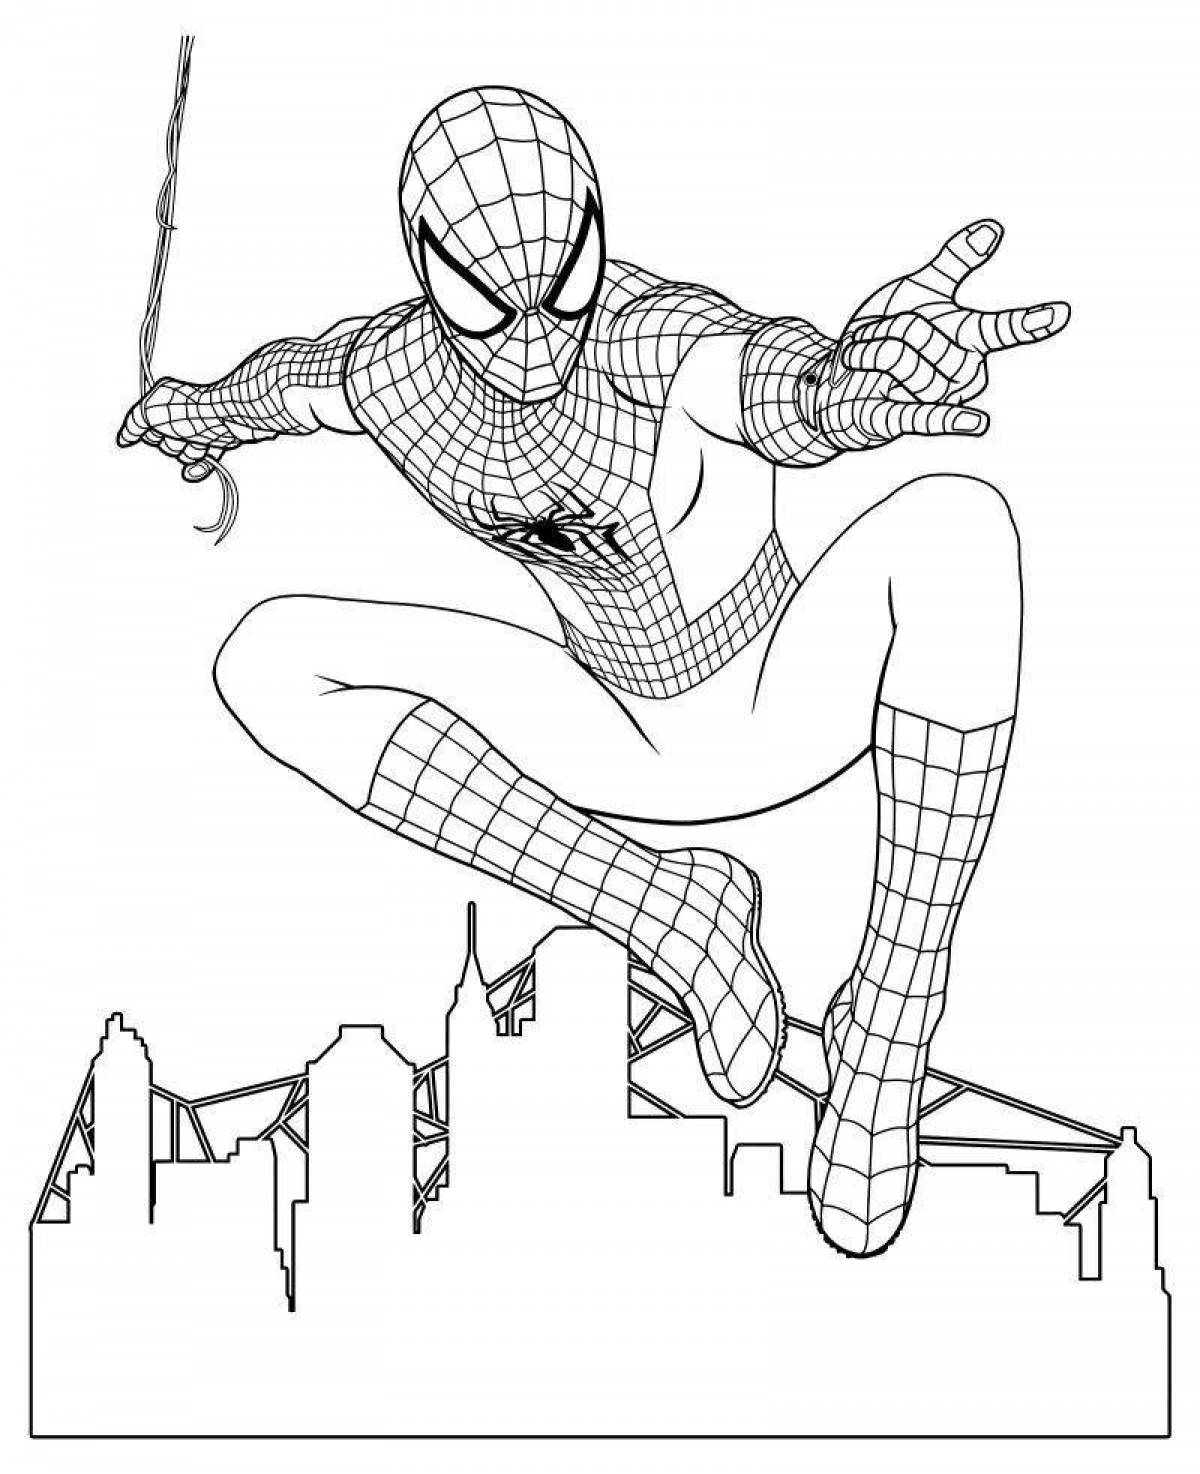 Adorable Spiderman turn on the coloring book